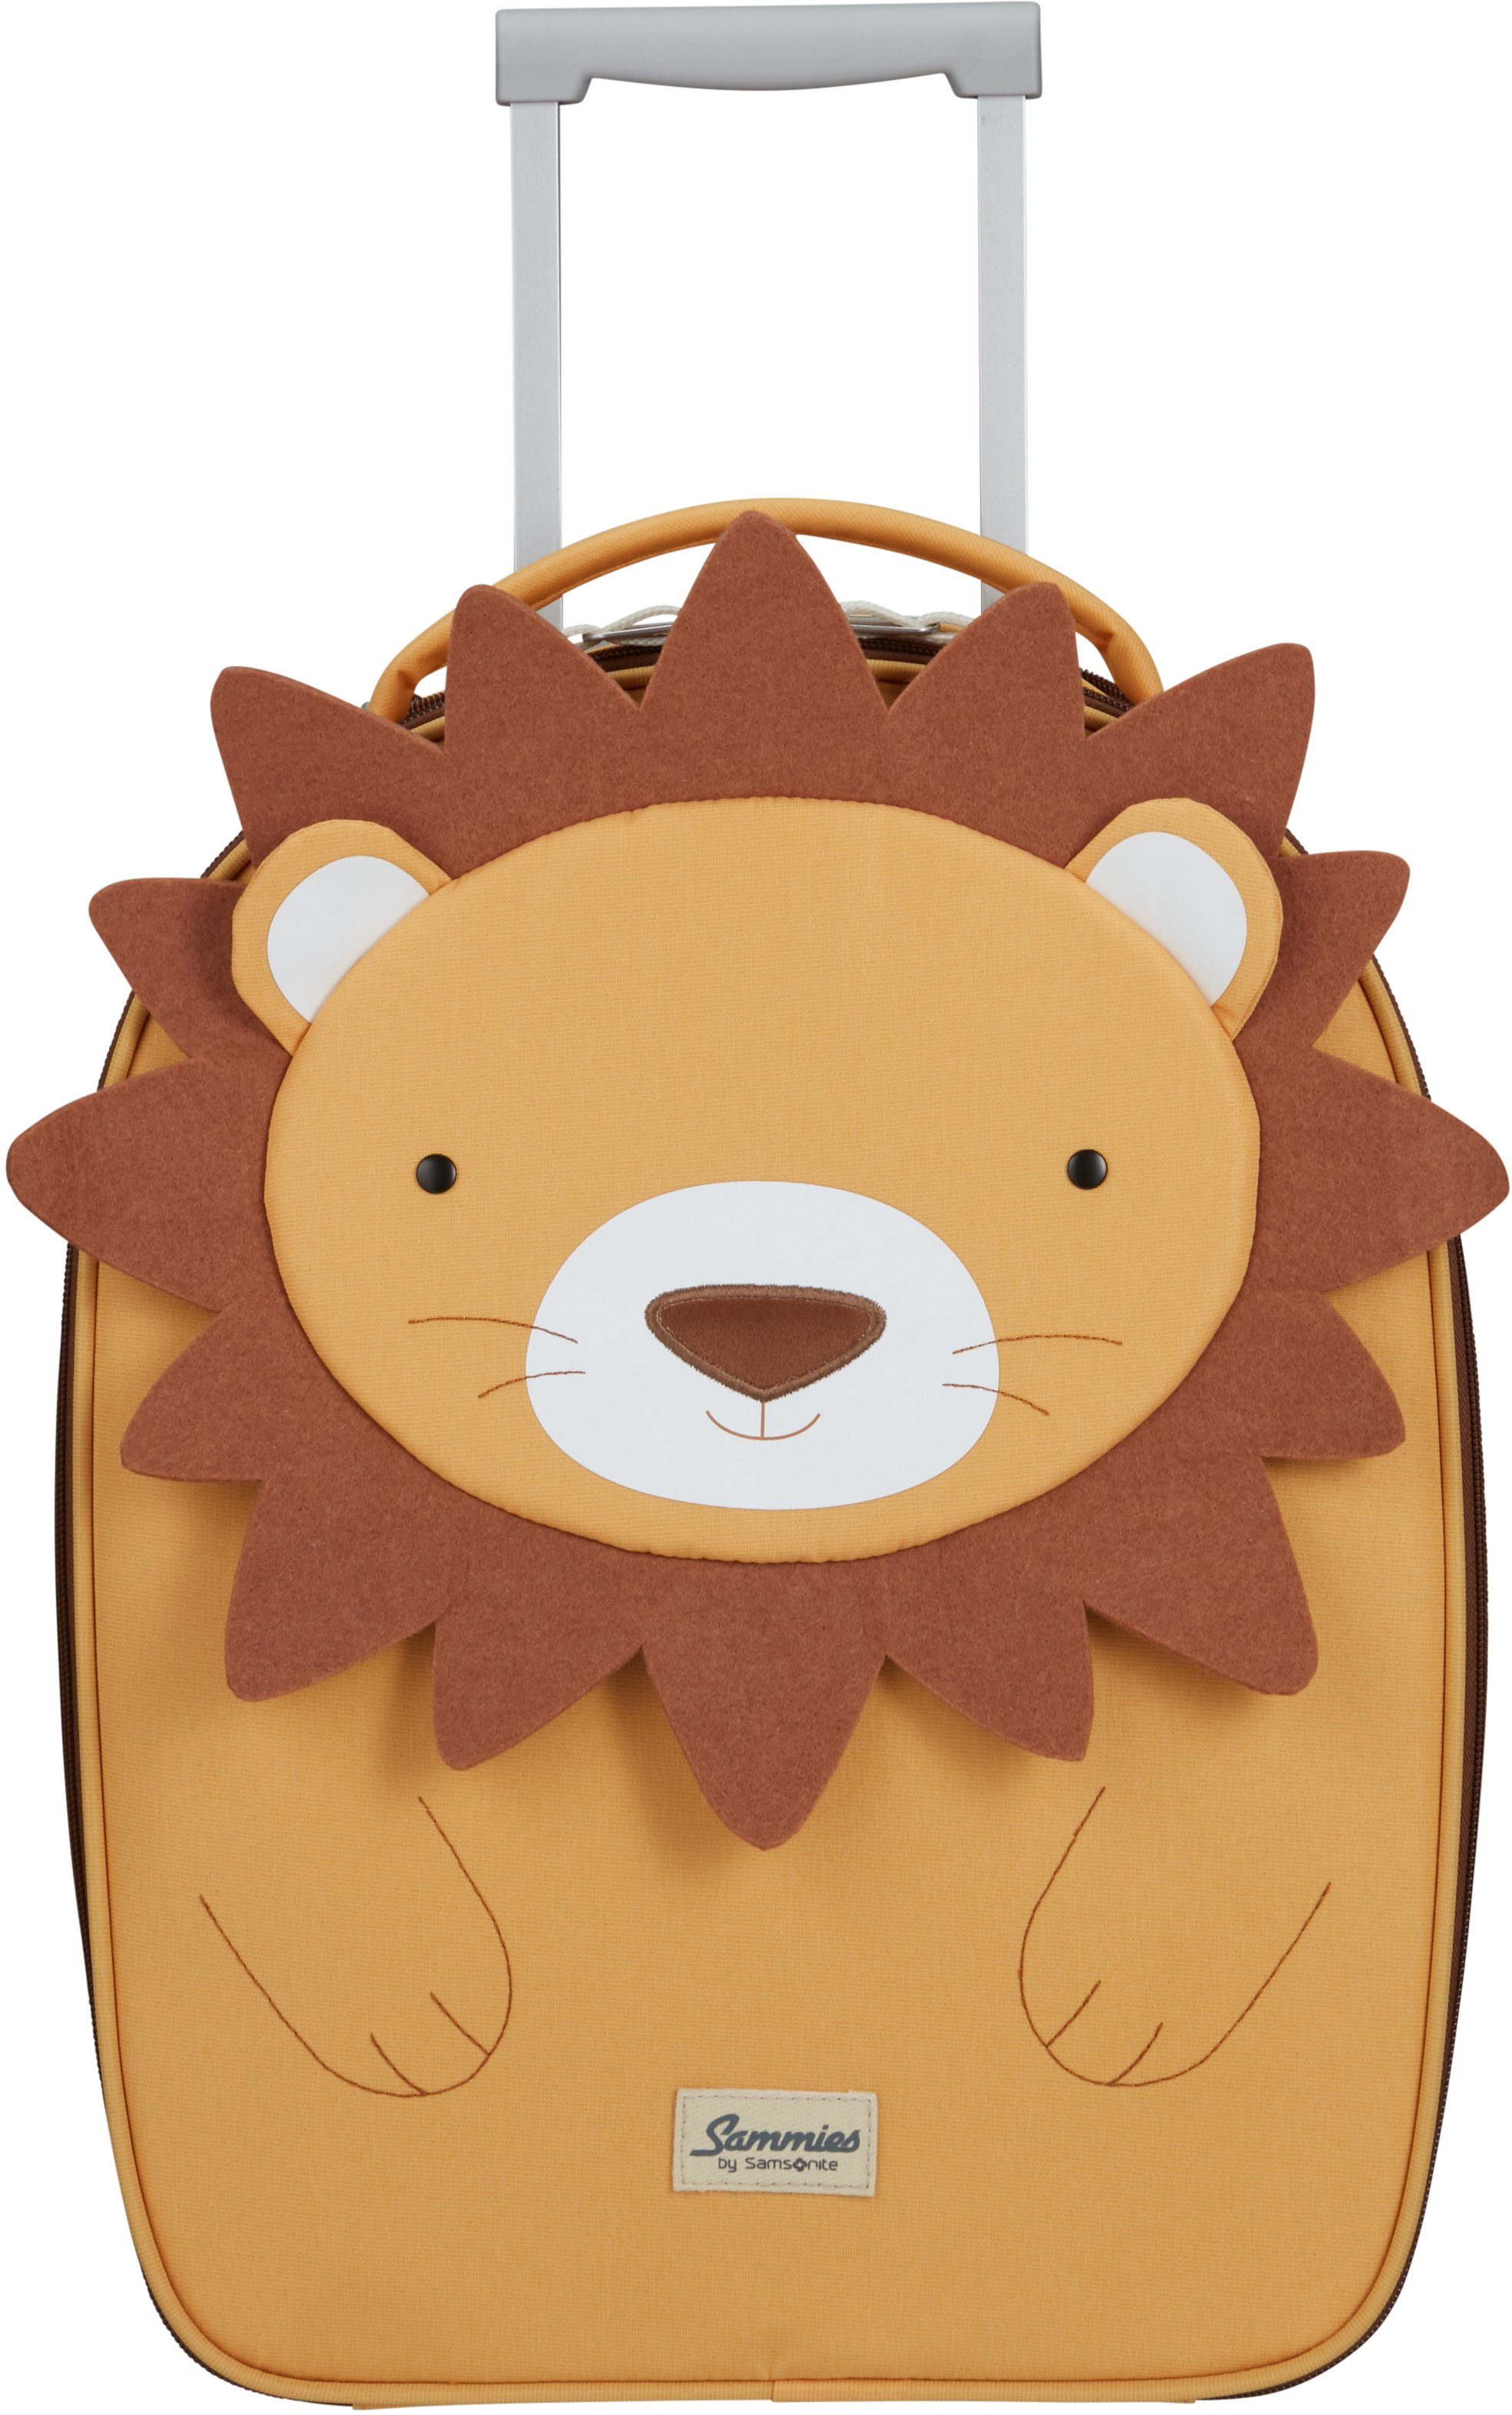 Samsonite Kinderkoffer Happy recyceltem Lion ECO, 2 Material Rollen, aus Lester, Sammies